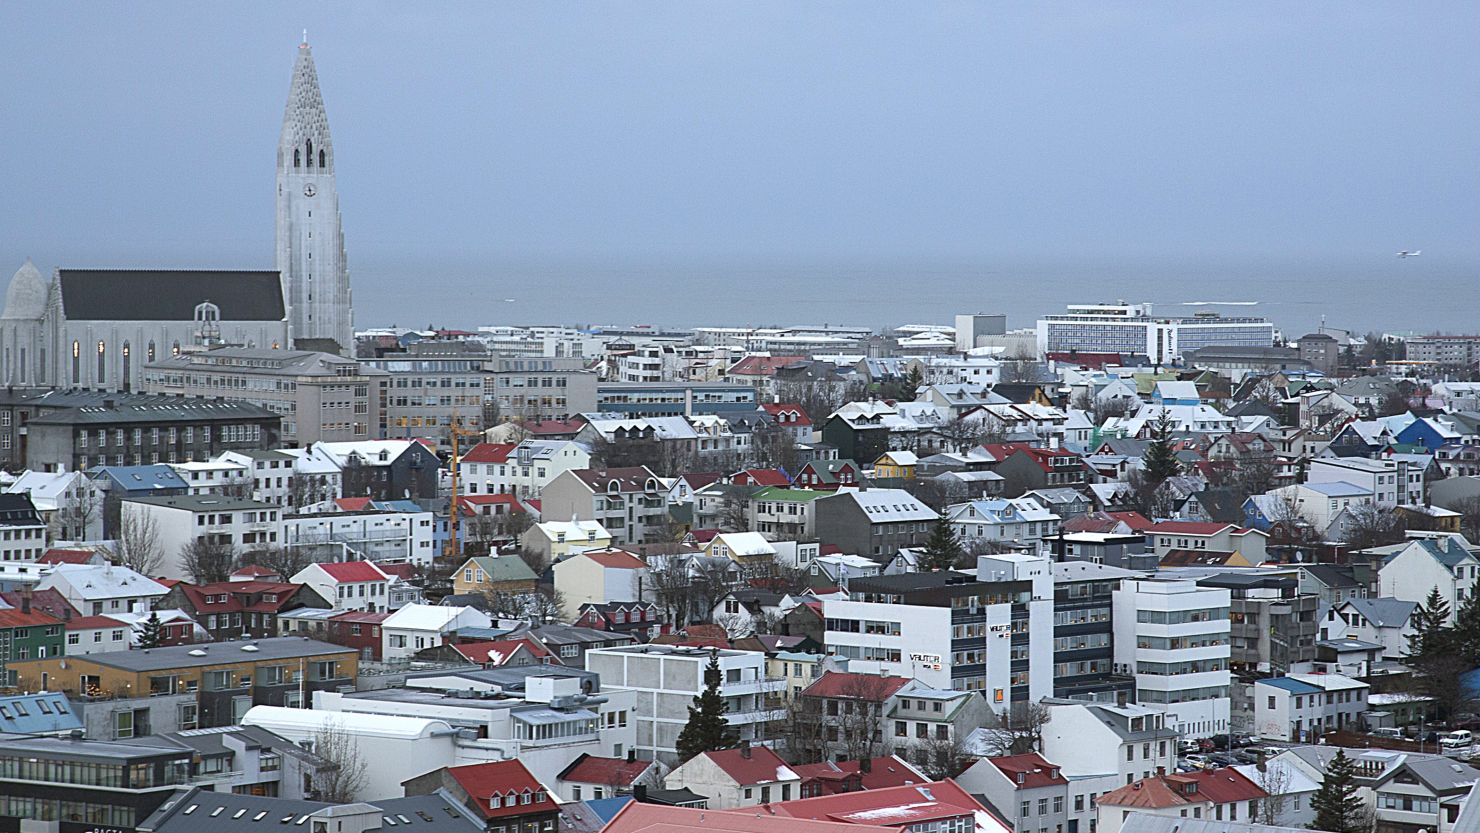 In Reyjkavik, Iceland's capital, government leaders are studying ways to ban Internet porn, calling it harmful to children.